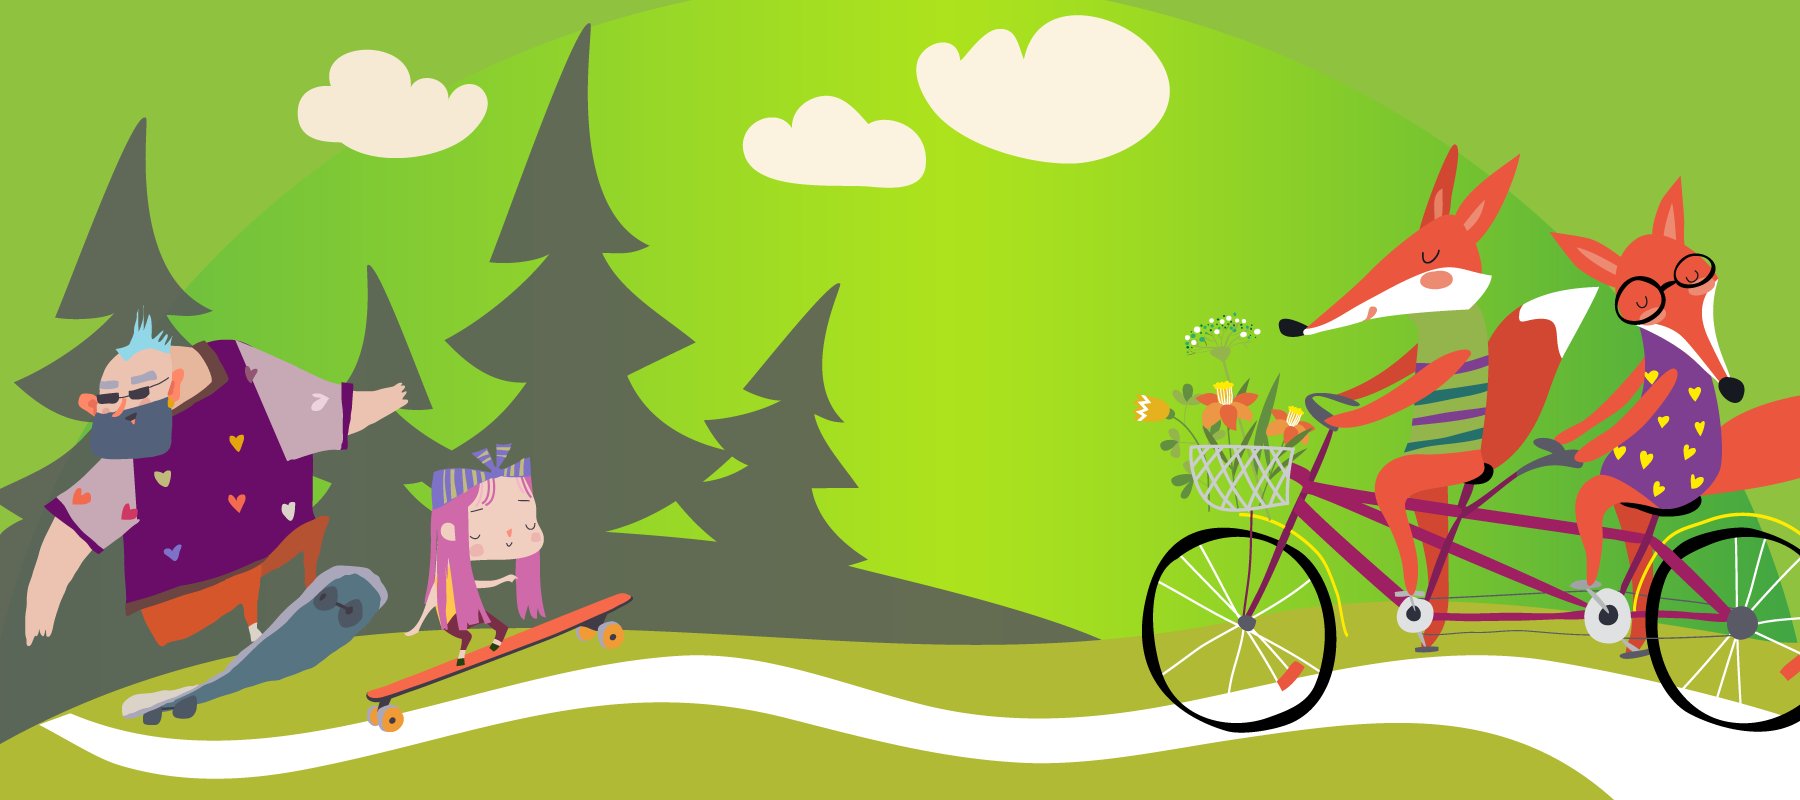 Illustration against a green background of two foxes riding a bicycle on the right, and two skateboarders on the left.